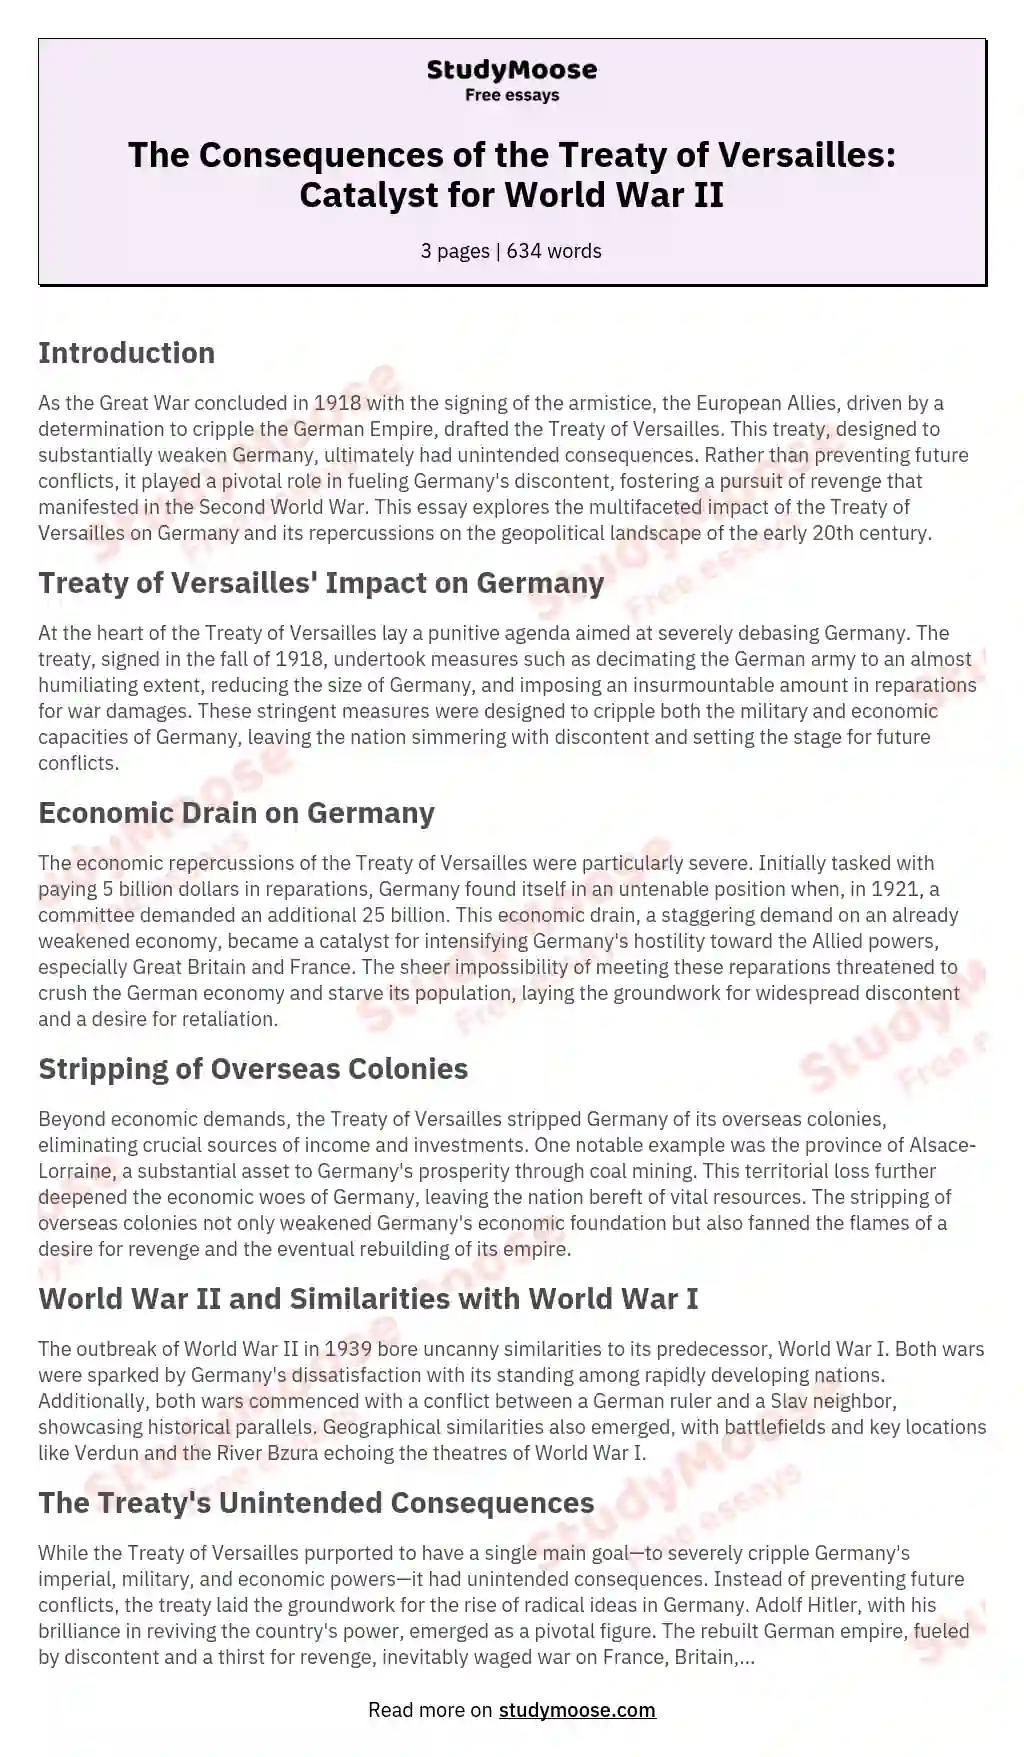 The Consequences of the Treaty of Versailles: Catalyst for World War II essay